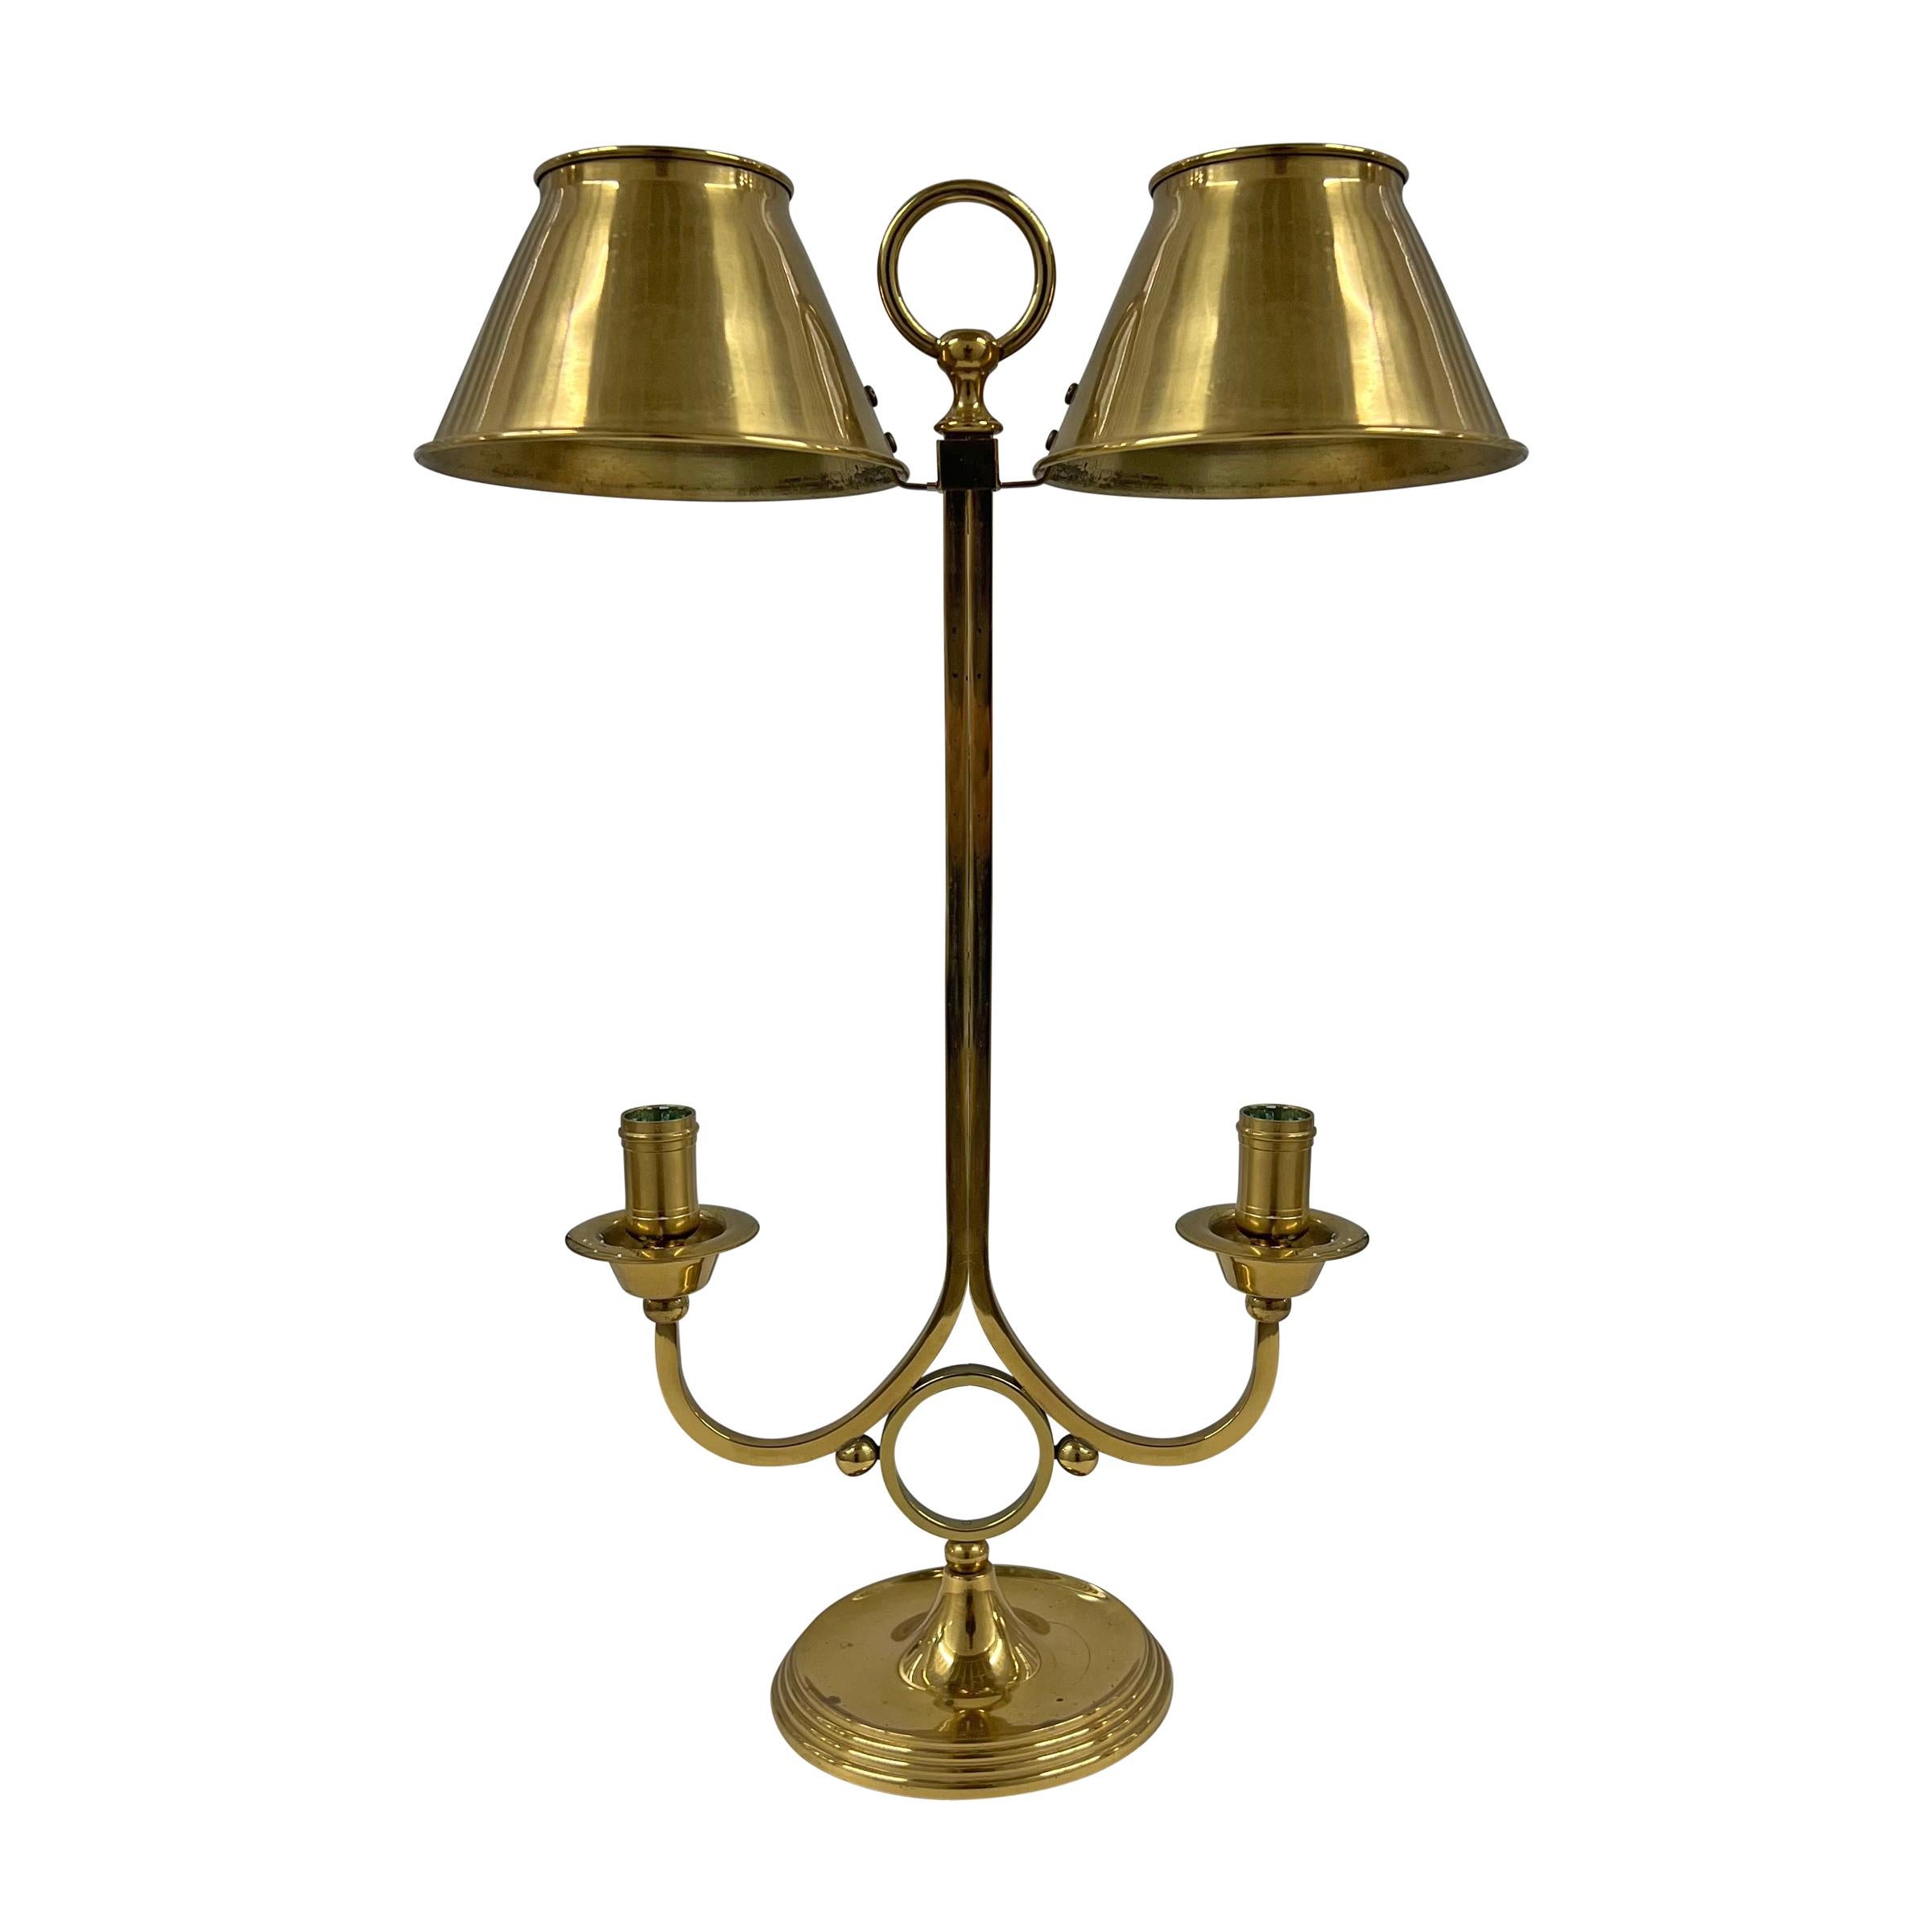 Vintage Adjustable Brass Candle Lamp In Good Condition For Sale In Chicago, IL